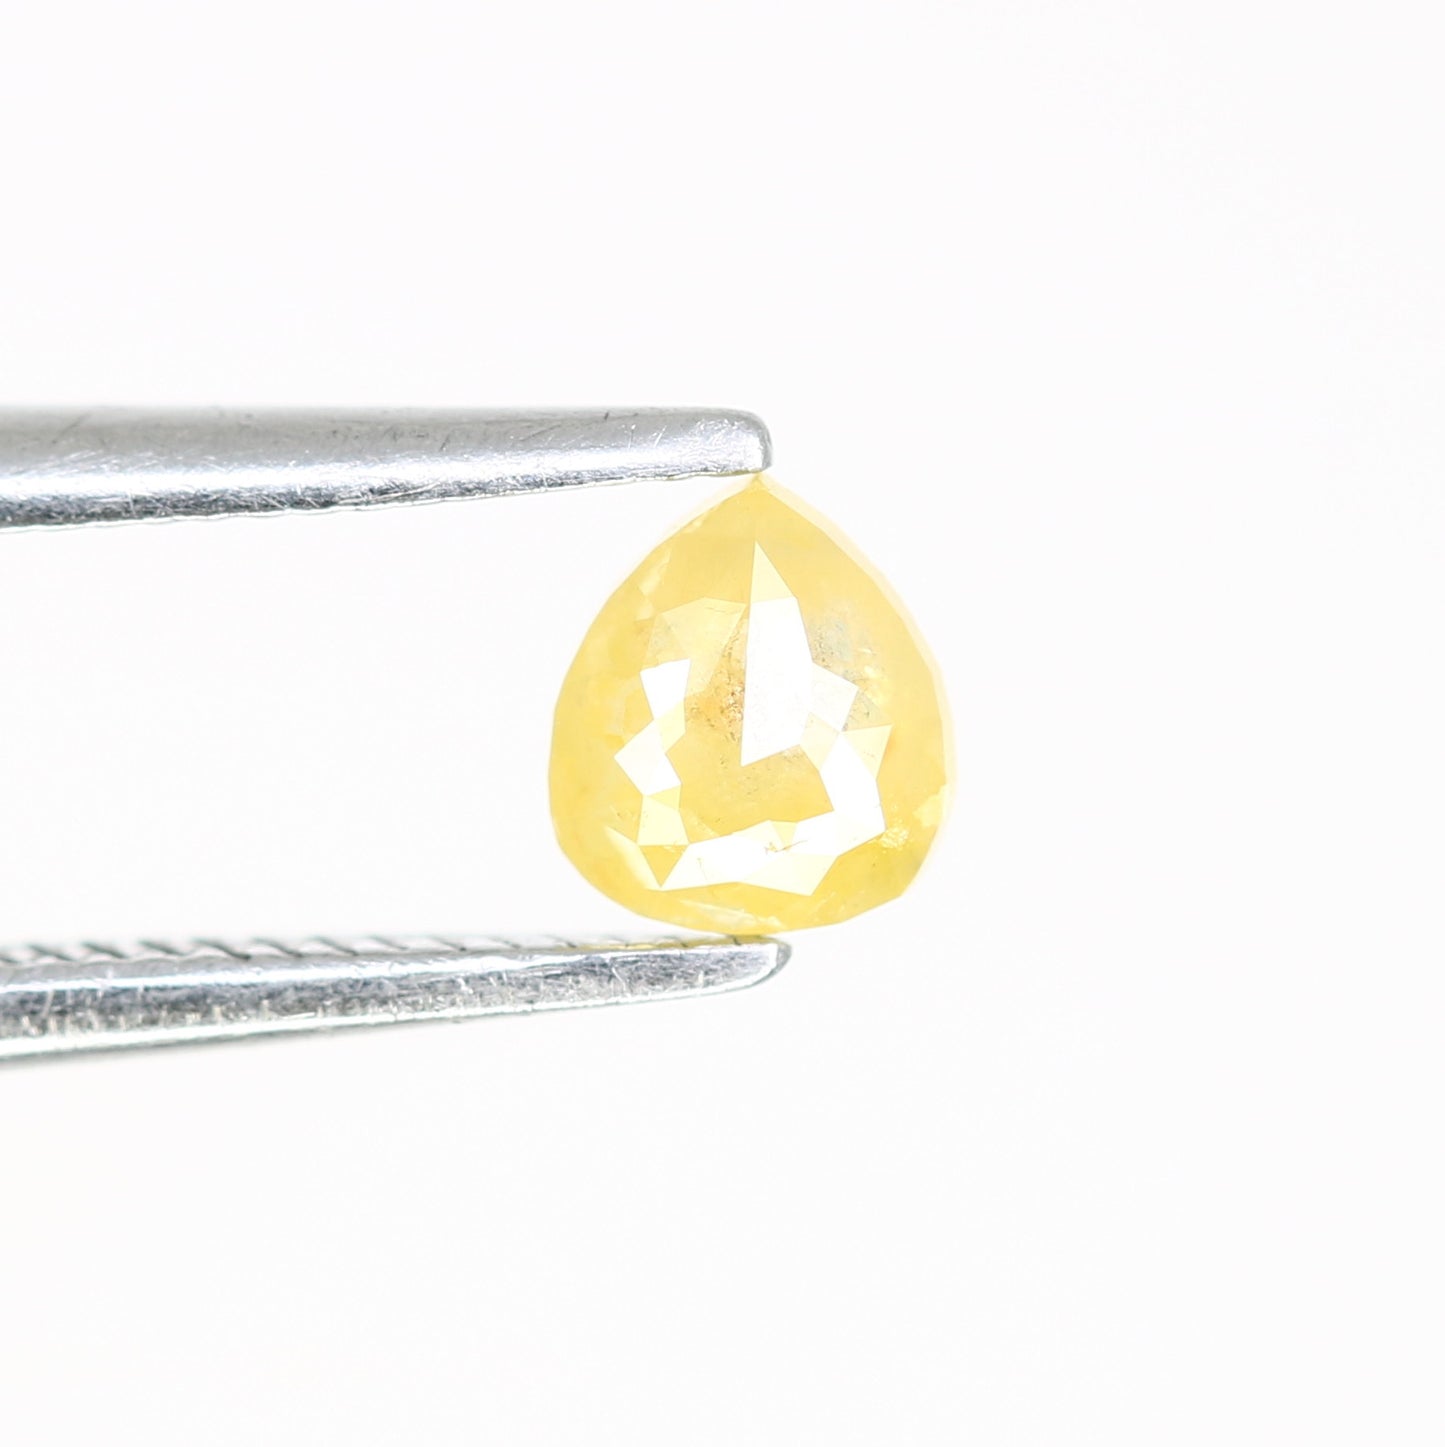 0.26 CT Fancy Yellow Pear Shape 4.40 MM Diamond For Engagement Ring